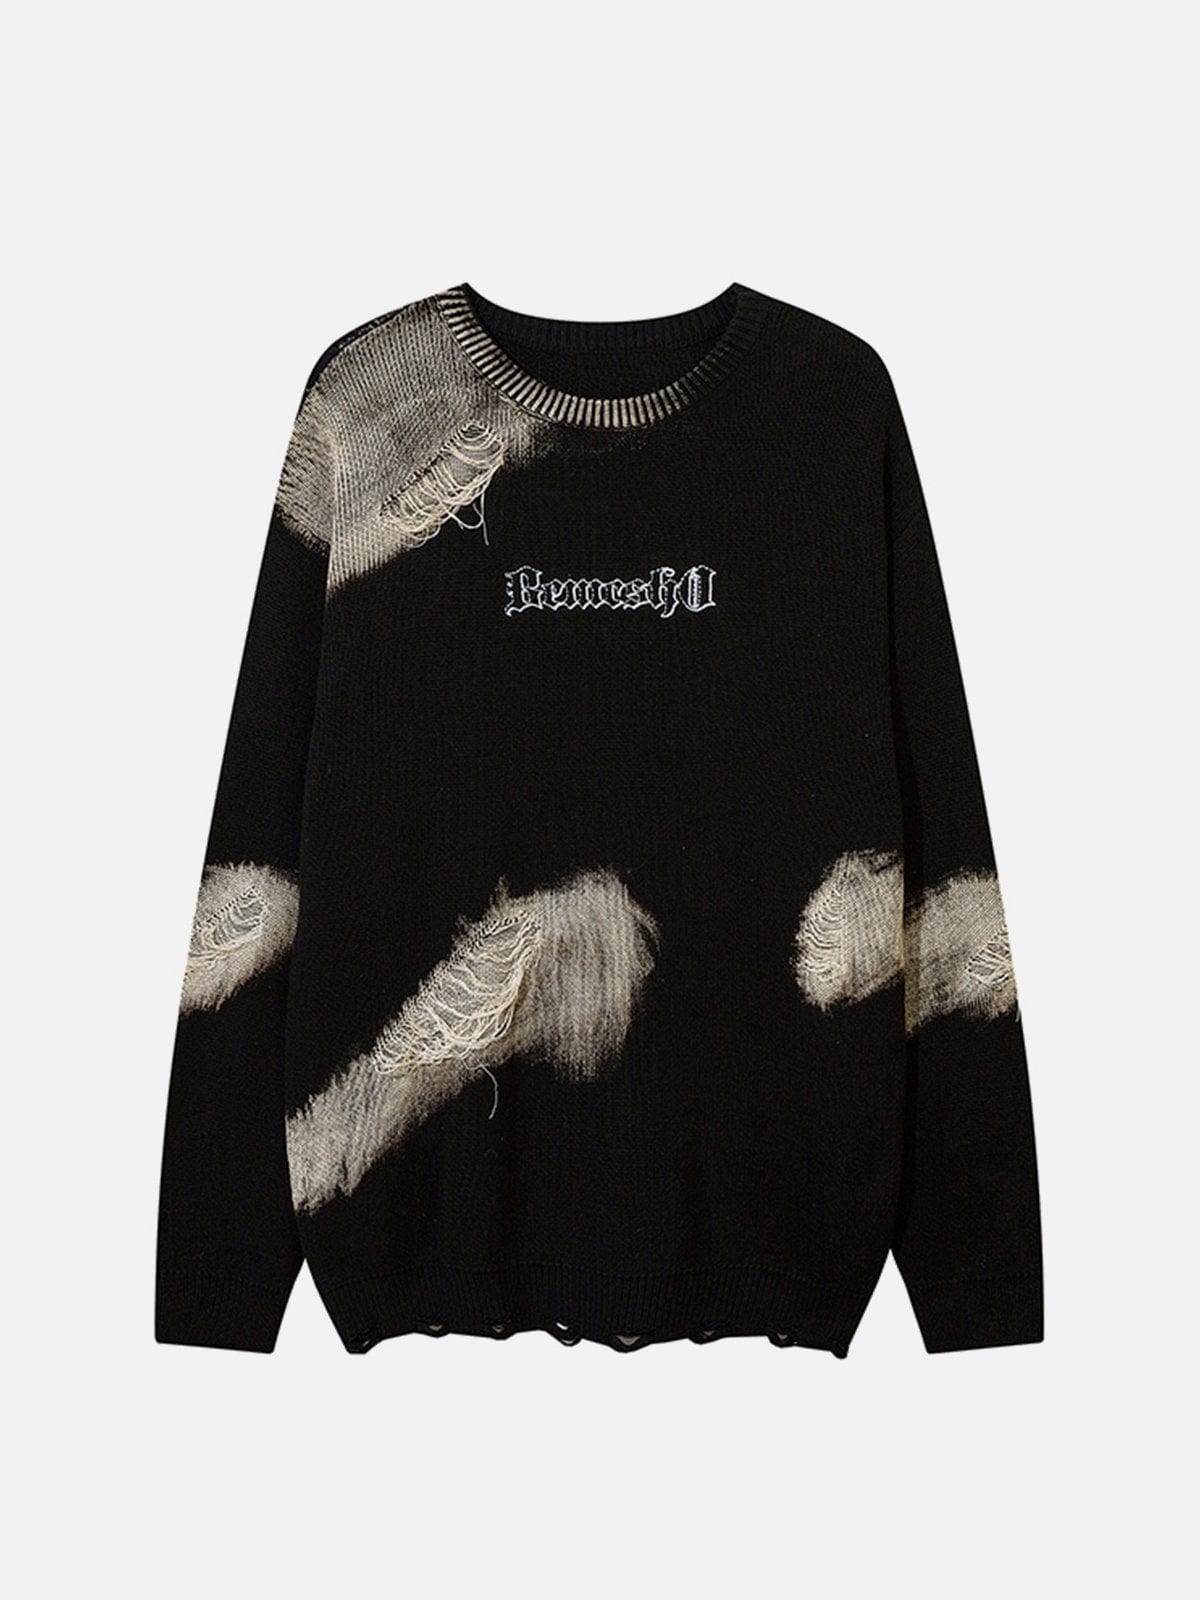 NEV Embroidered Ripped Tassels Sweater